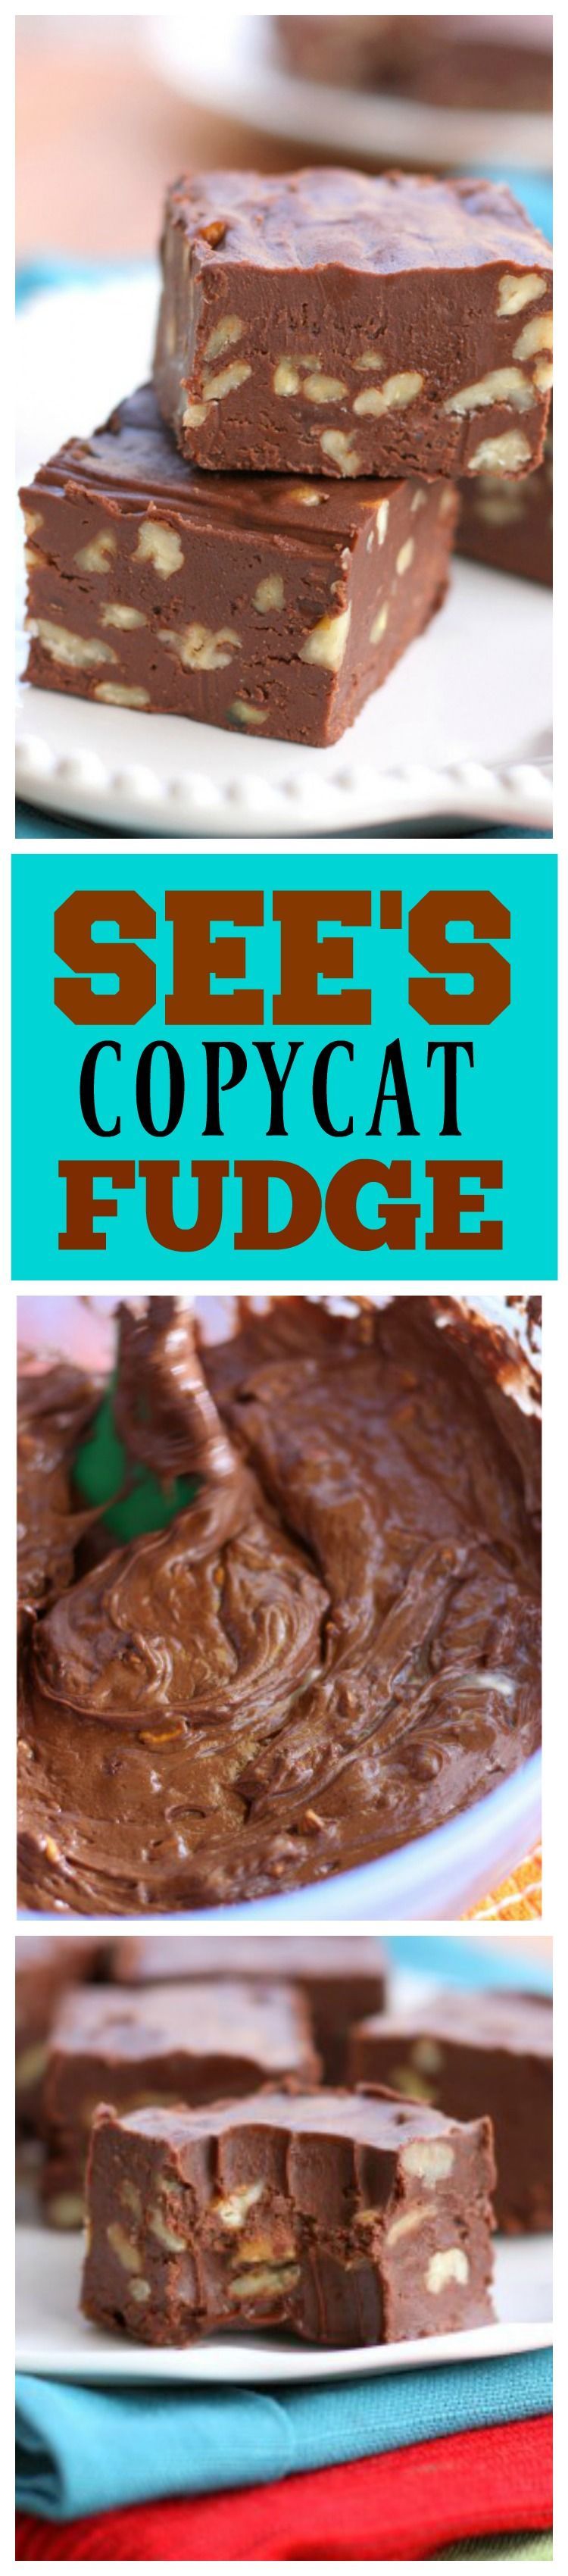 Sees Copycat Fudge is perfect and creamy. No candy thermometer required!